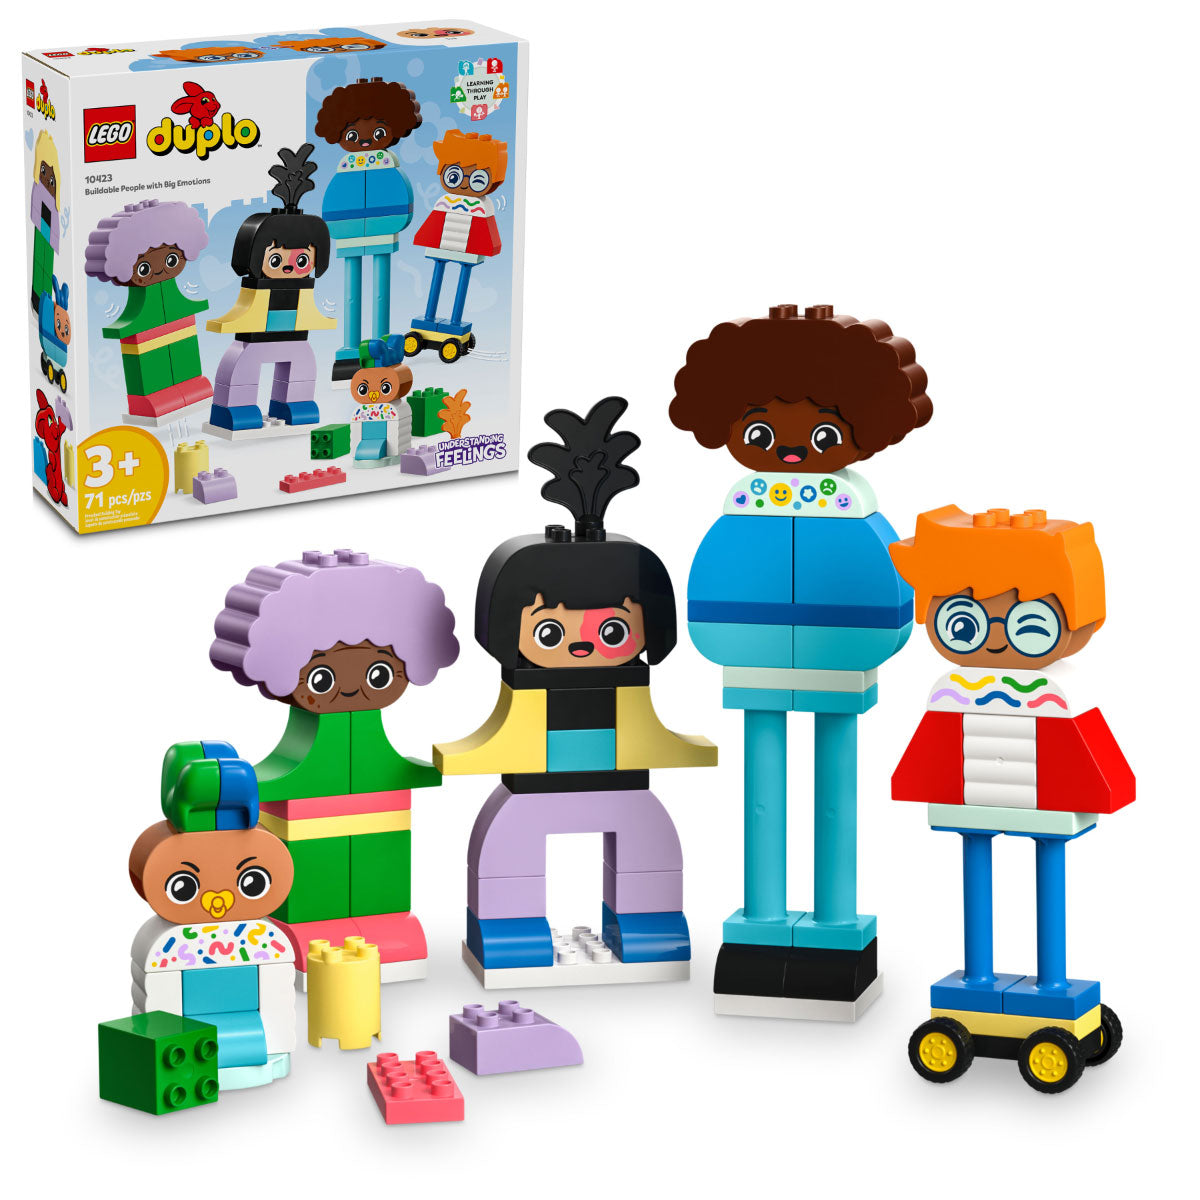 LEGO Duplo Buildable People with Big Emotions